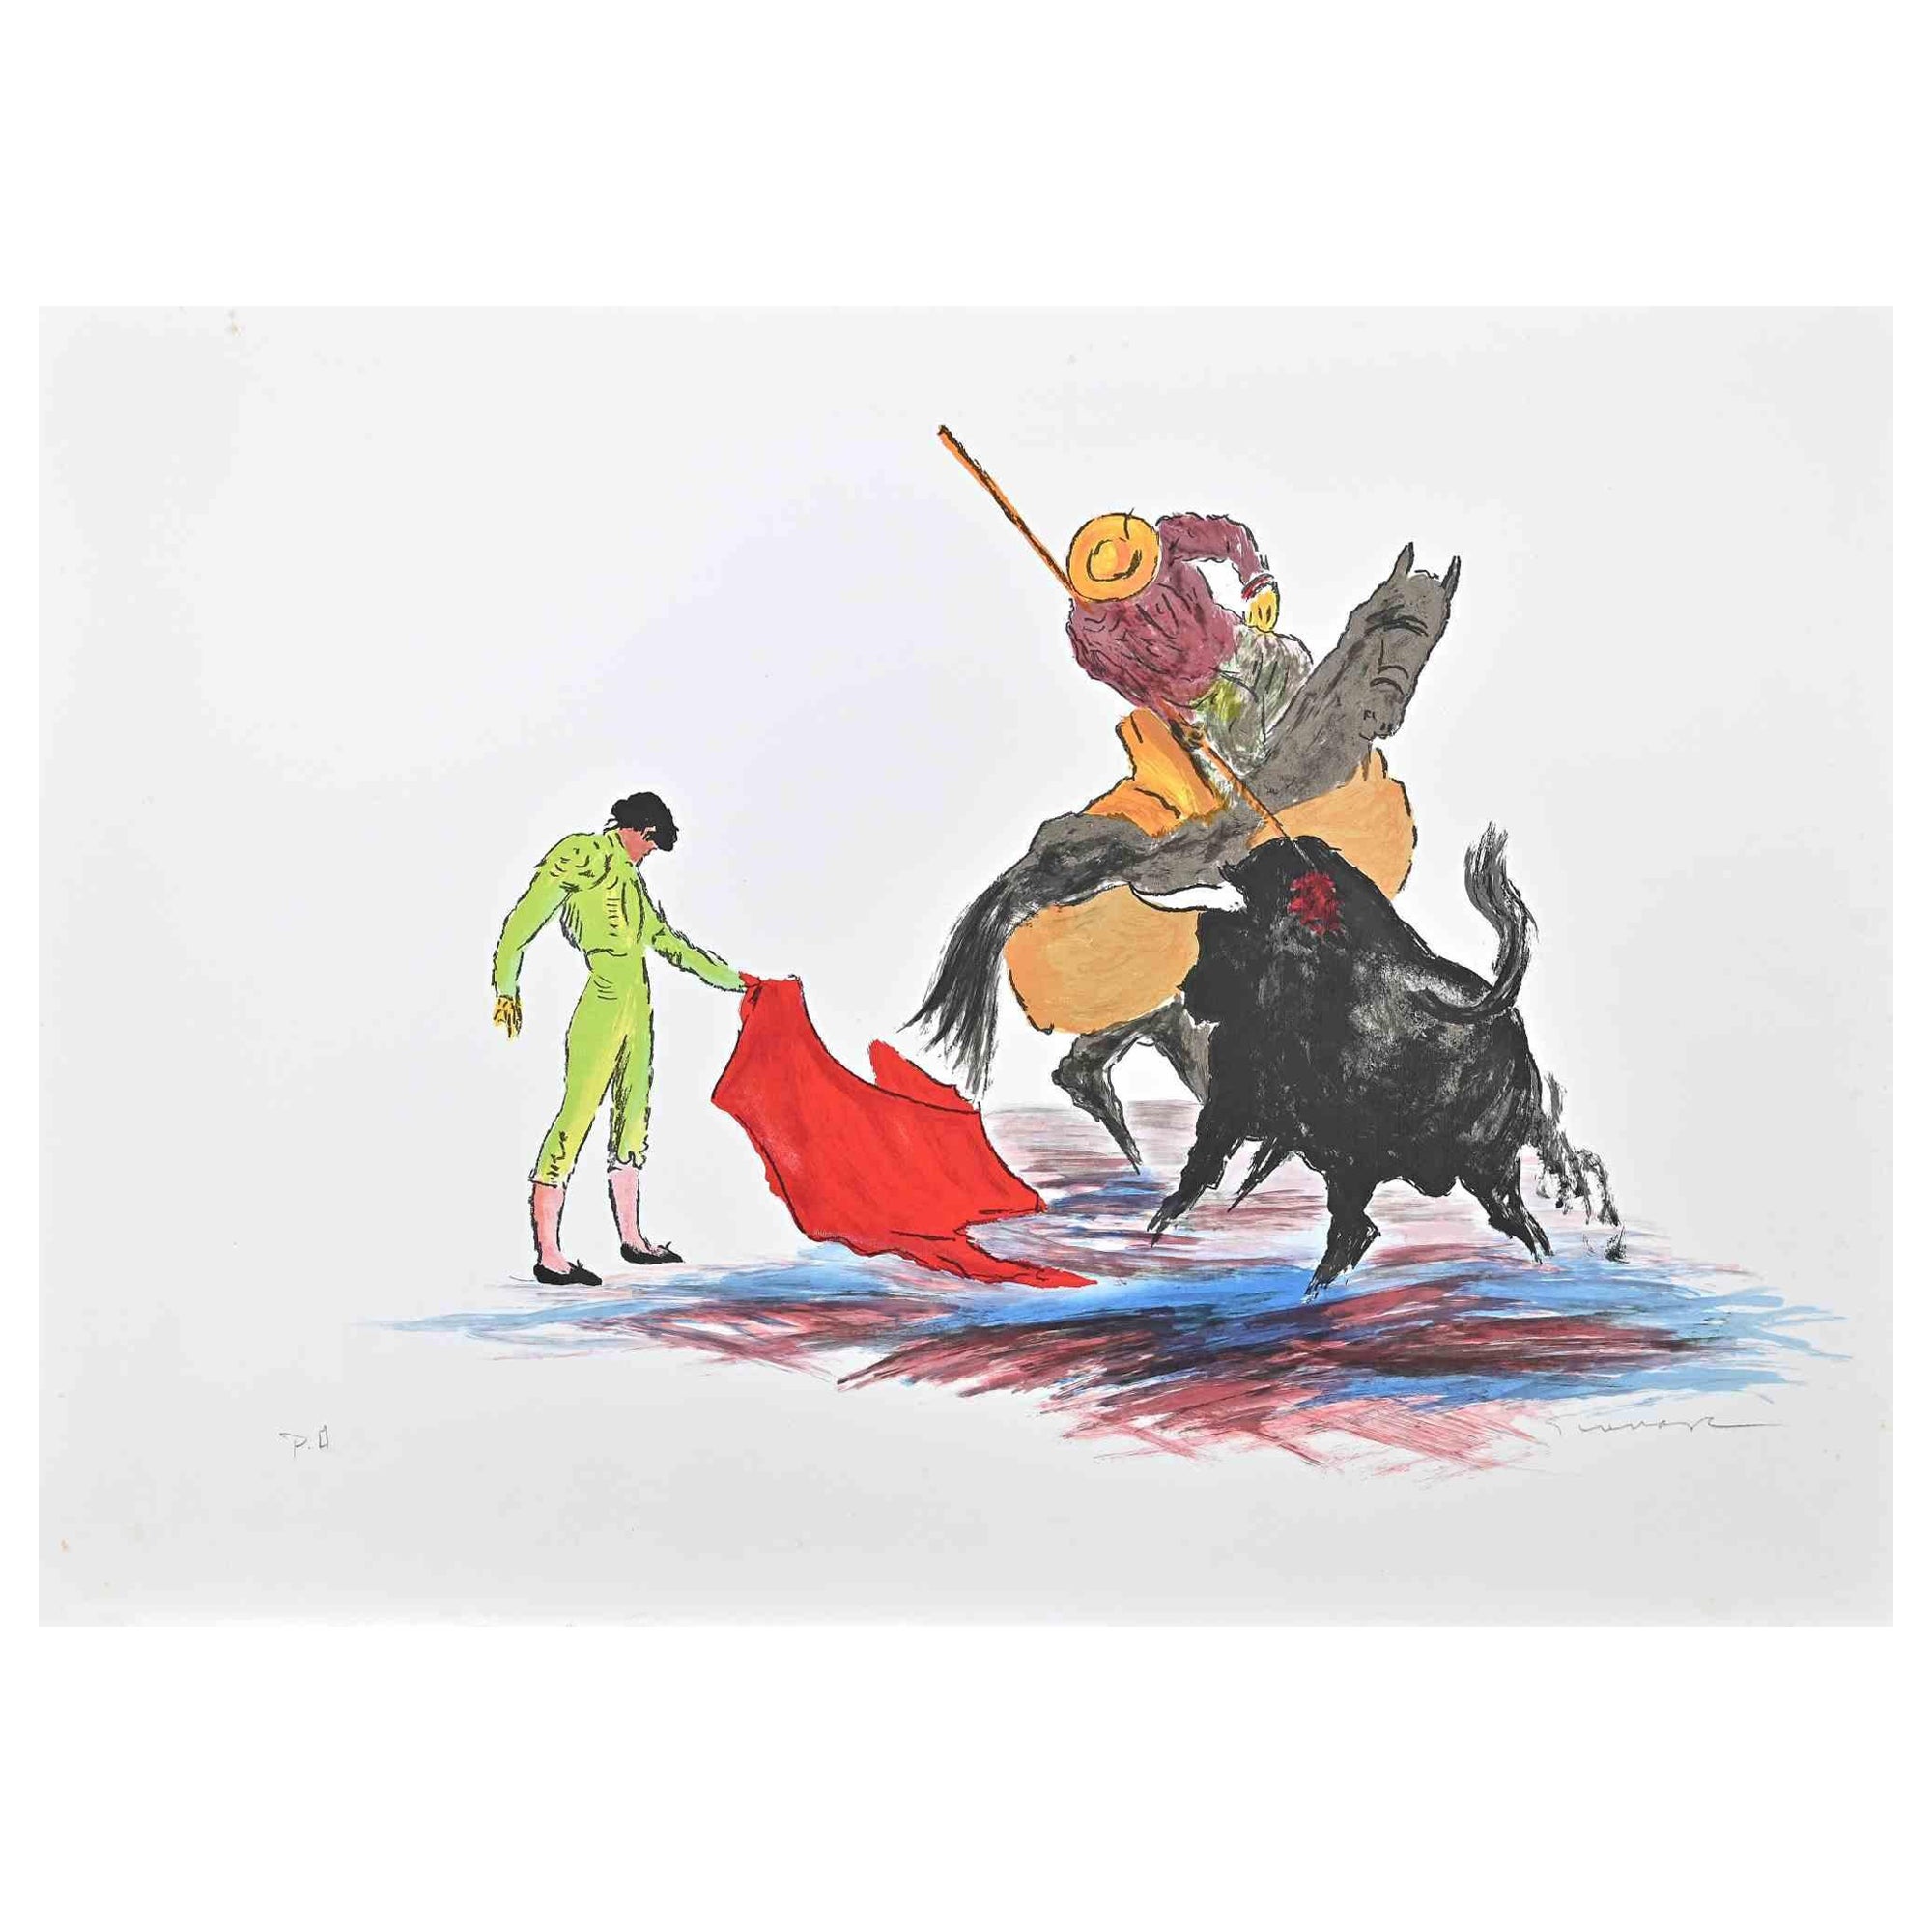 Bullfighter is a very colorful artwork realized by Josè Guevara in the  1990s.

Lithograph on paper. Edited by Fondazione Di Paolo.

Hand-signed.

Artist's proof.

Good conditions.

The artwork shows one of the most represented themes of Josè